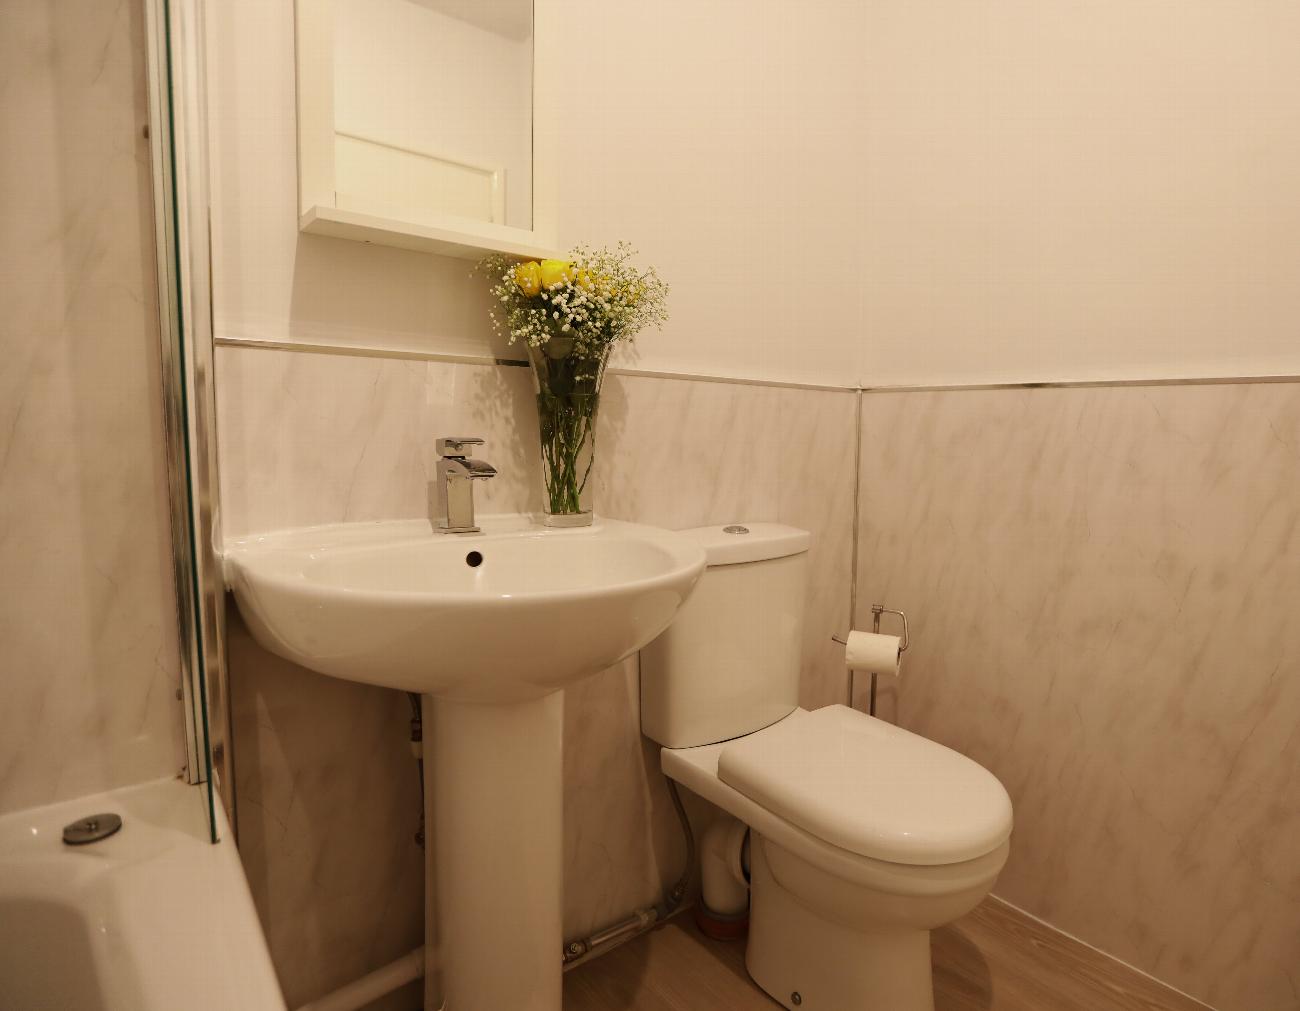 Self-Catering Holiday Rentals in Bideford | Woodside Apartment gallery image 9